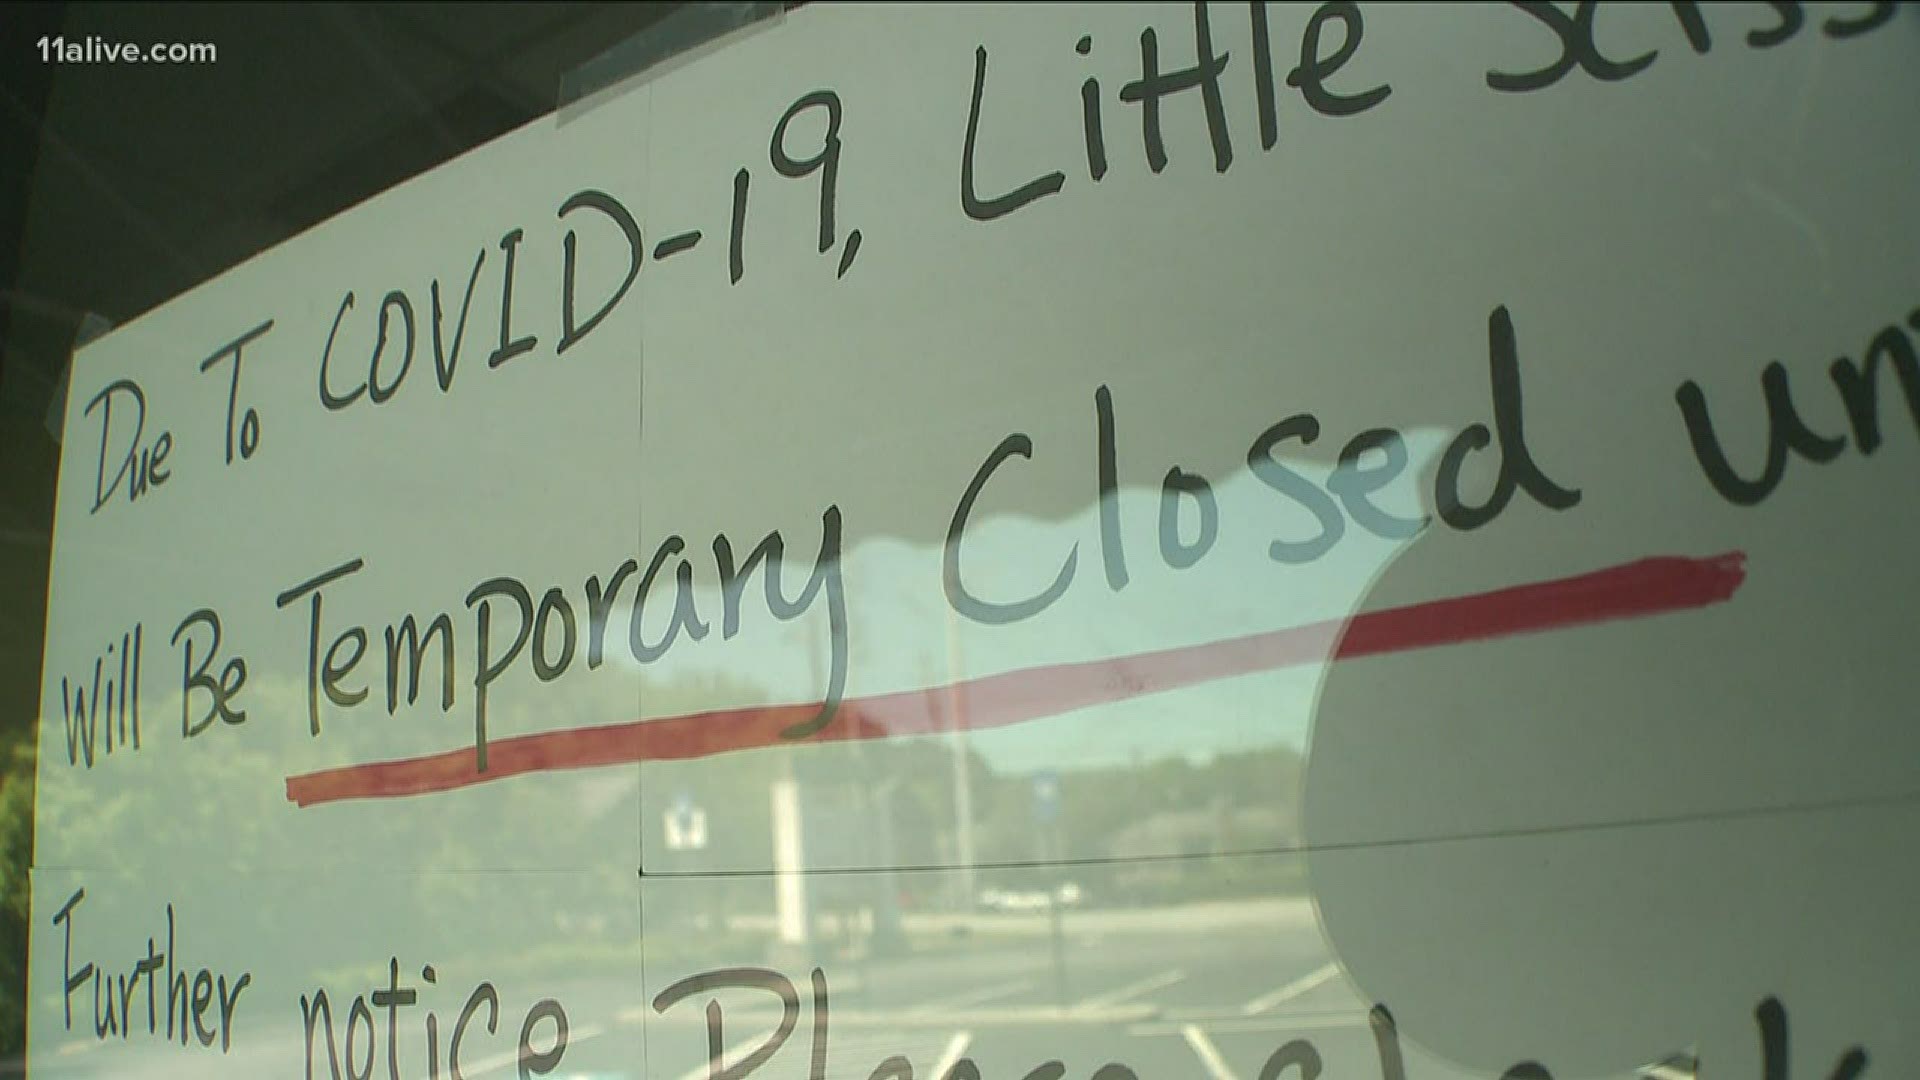 Many Businesses are still closed due to COVID-19.